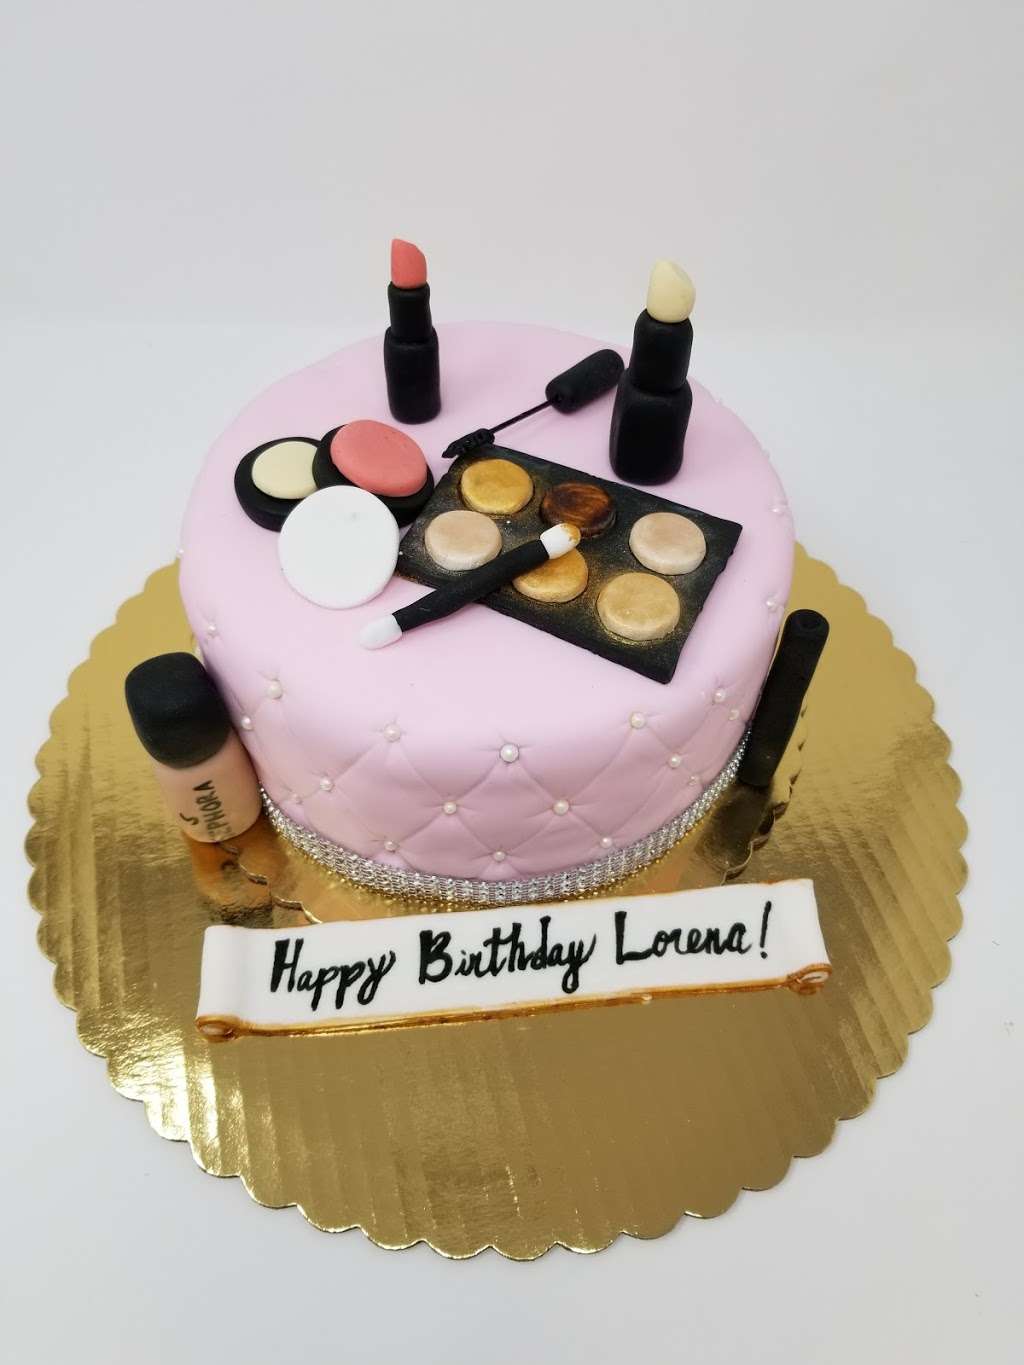 Cake Makes Life Sweeter | 33 Lafayette Rd, Fords, NJ 08863 | Phone: (732) 630-2253